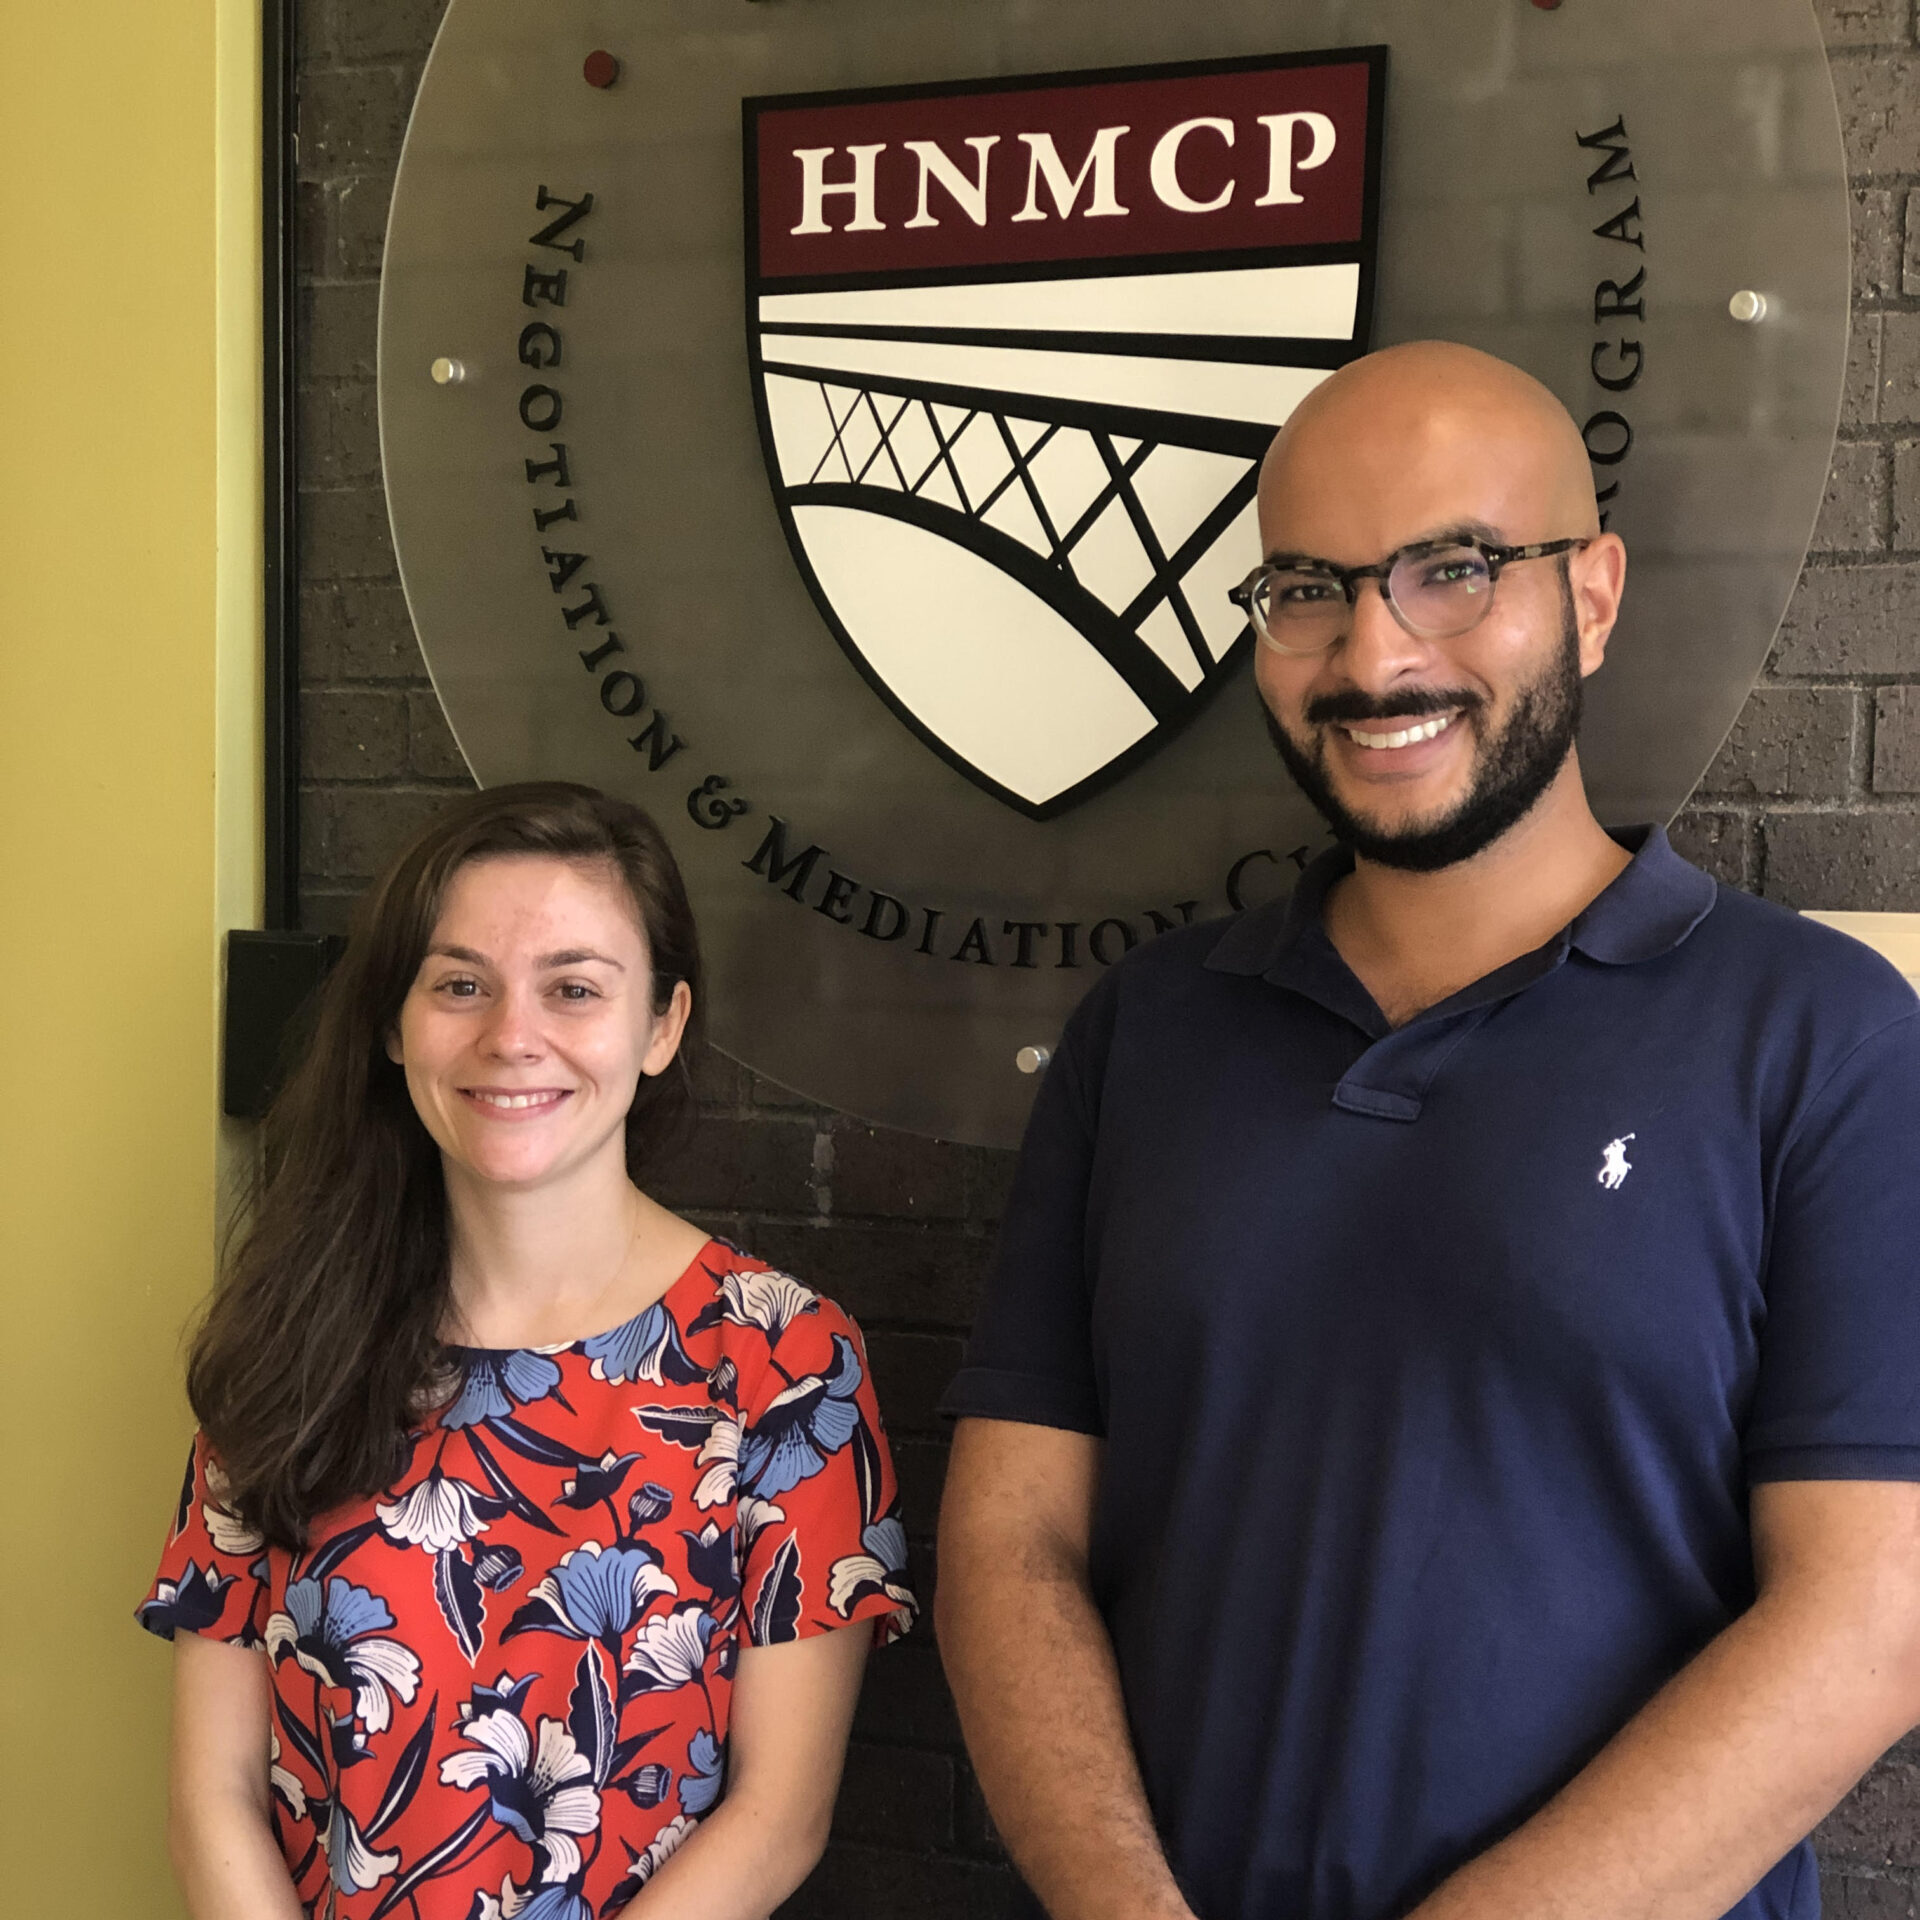 A shorter woman and a taller man, both smiling, standing in front of the HNMCP Logo